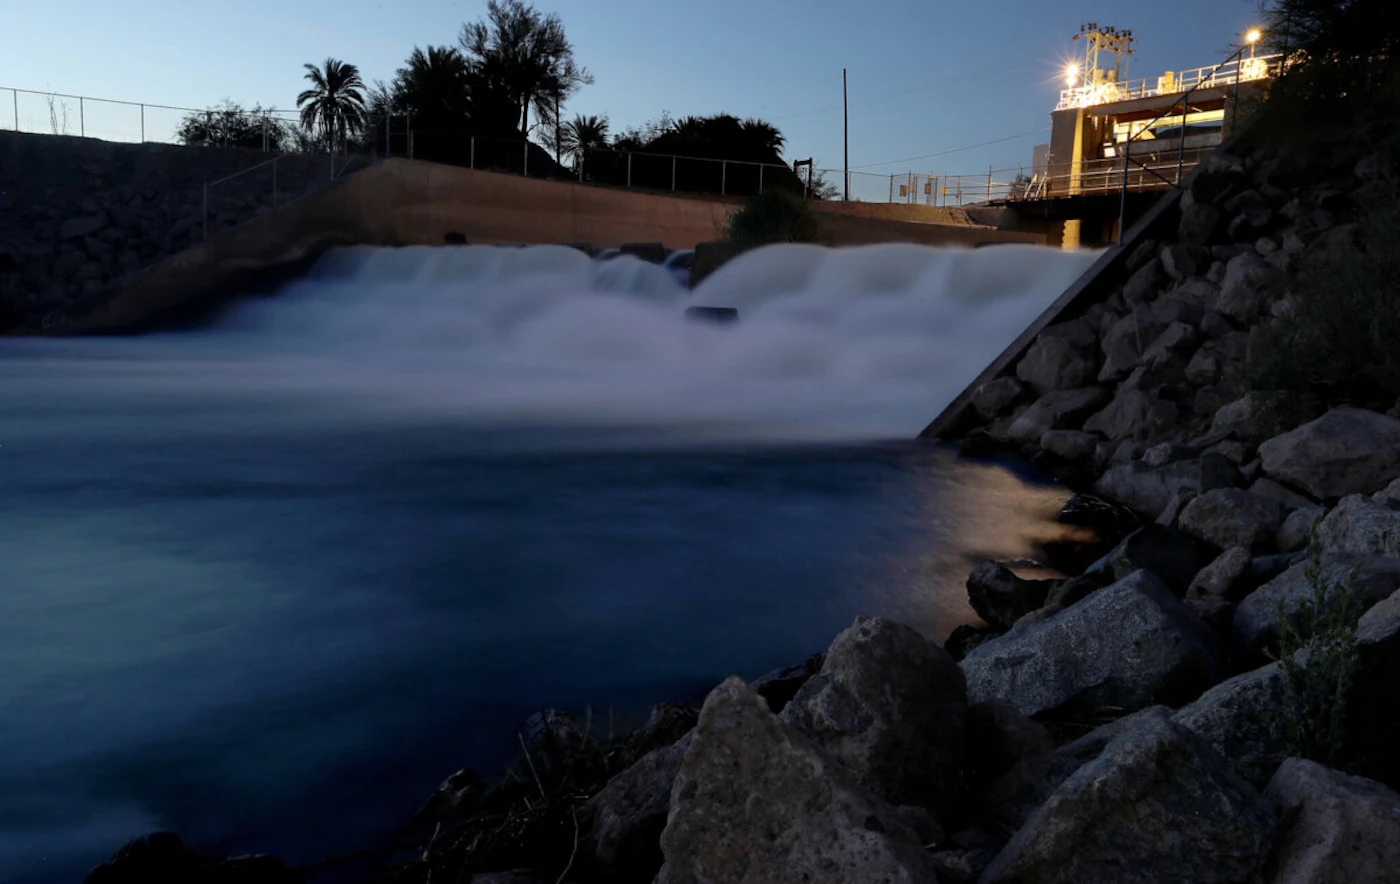 YUMA, ARIZONA - MAY 16, 2022. Colorado River water churns through the weir of the Laguna Diversion Dam near Yuma. The dam was the first to be built on the Colorado River and ended boat travel on the river. It now primarily serves to regulate outflows of the Imperial Dam. (Luis Sinco / Los Angeles Times via Getty Images)